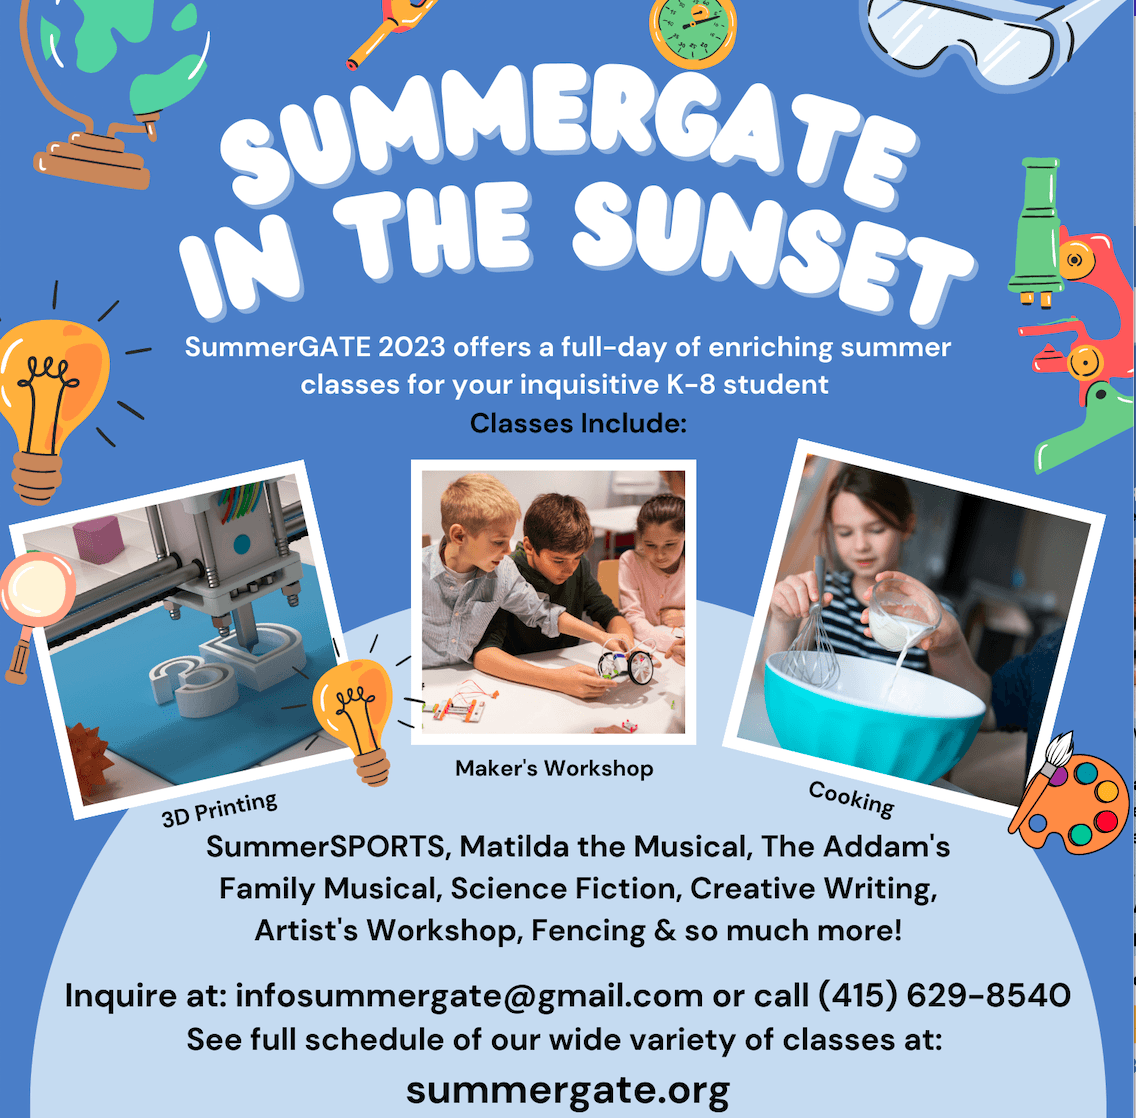 Check out SummerGATE Camp!